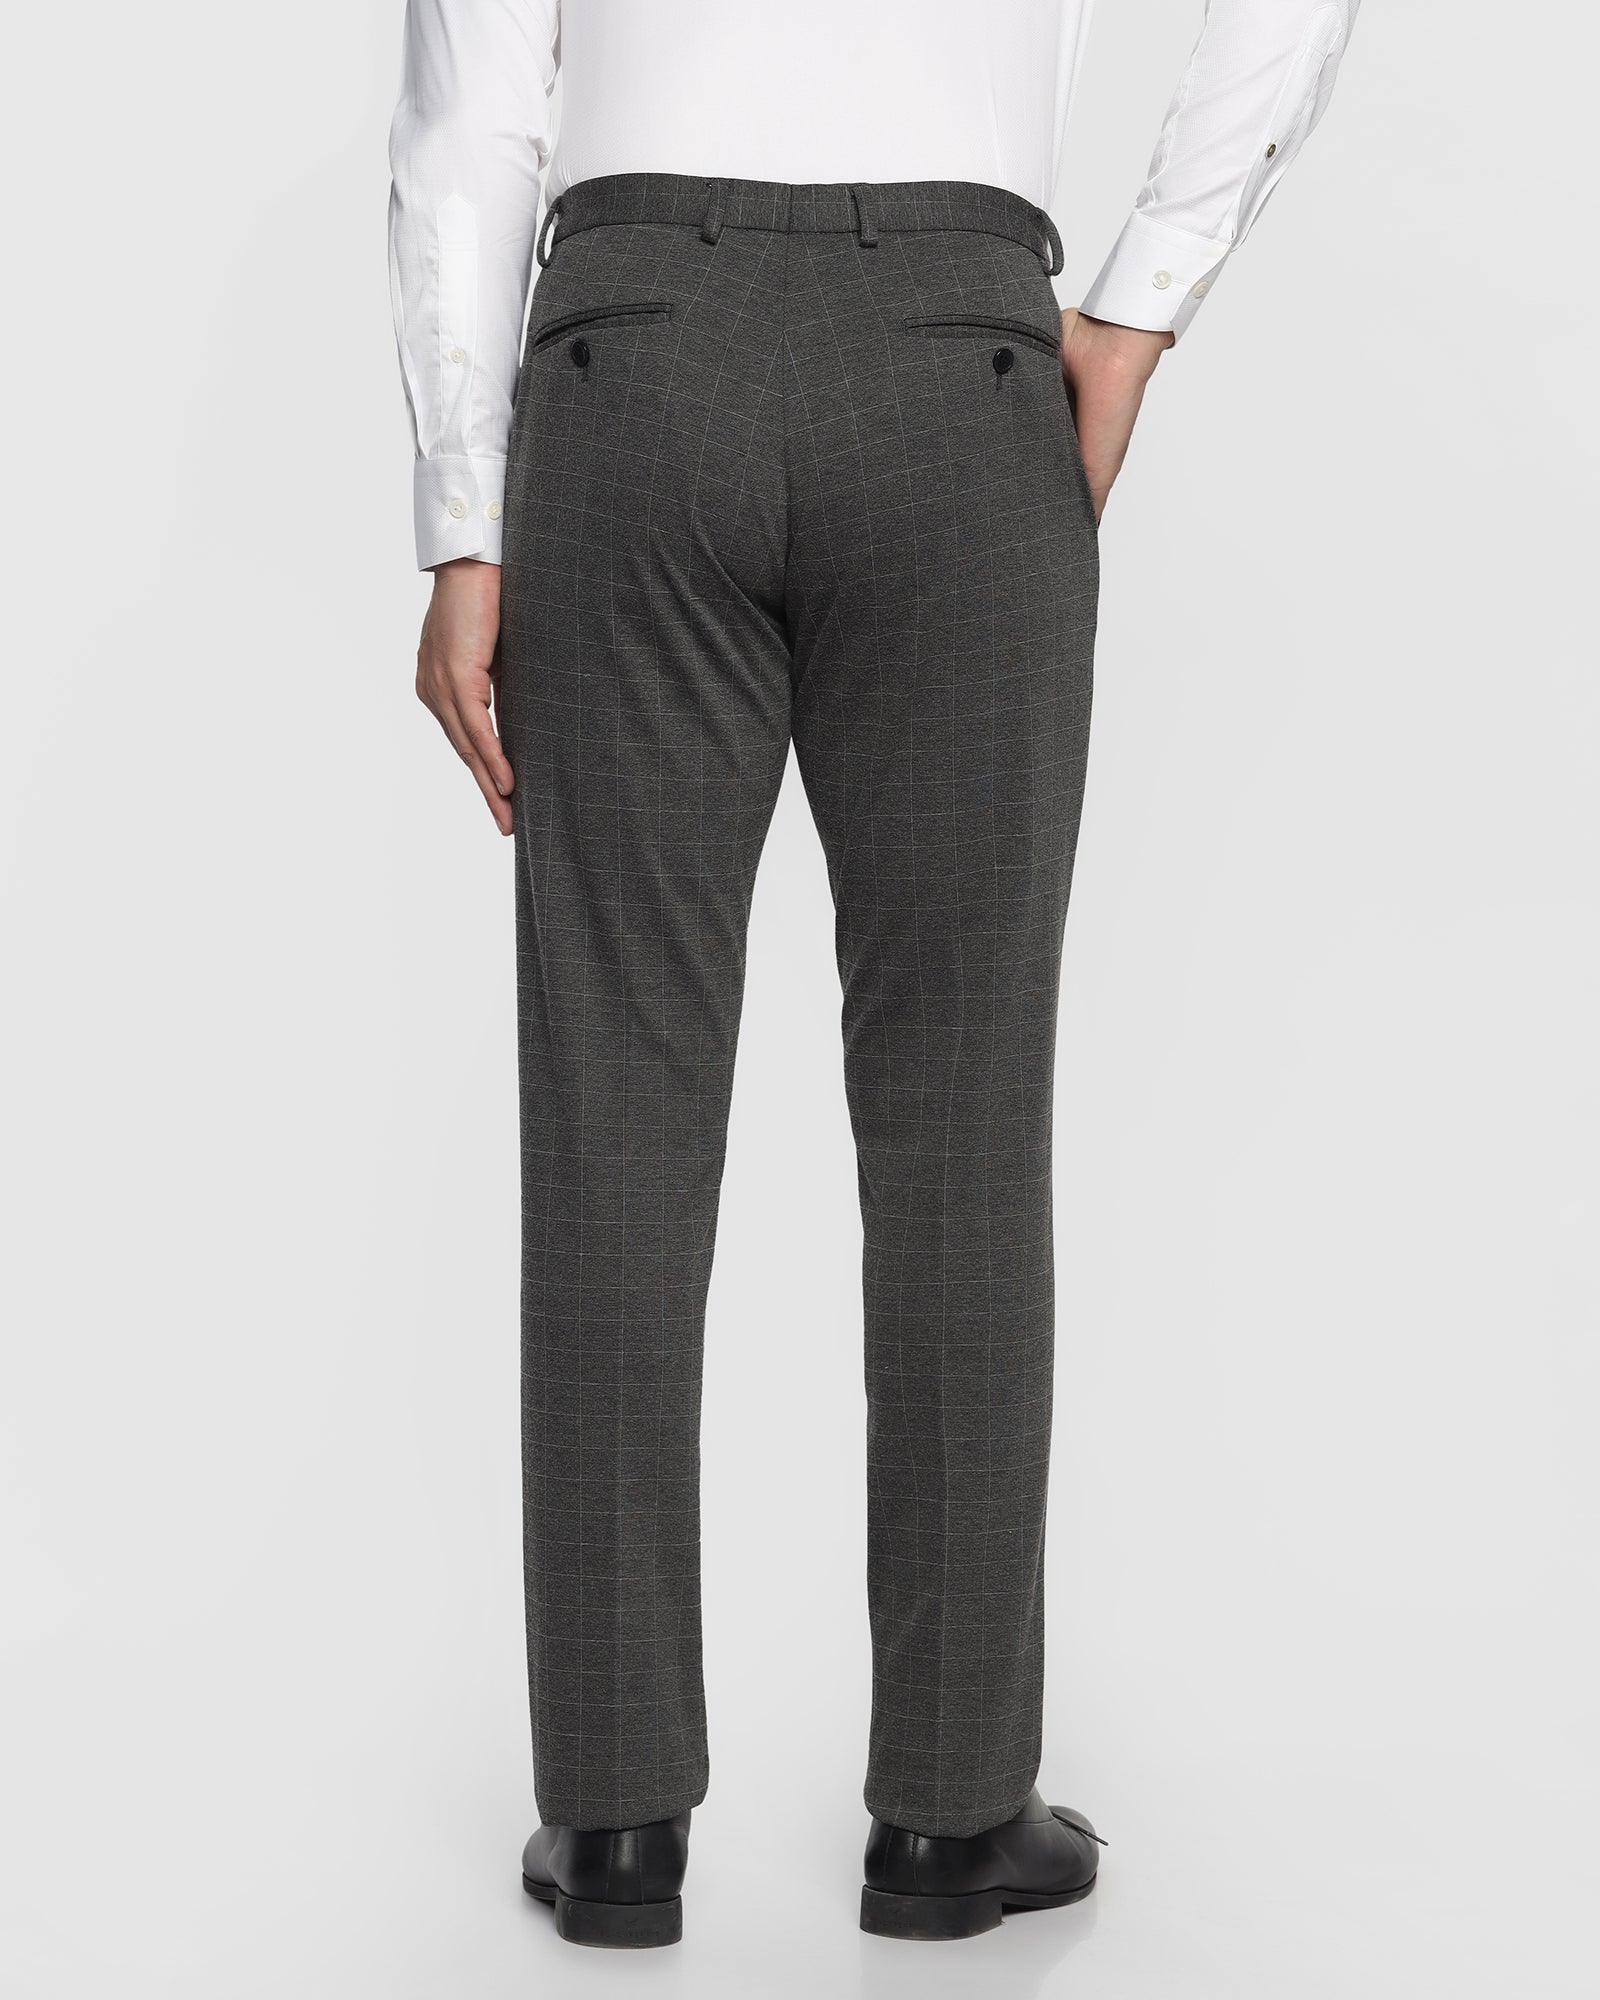 Check Formal Trousers In Charcoal B 91 Oslo DLPM2211Z1IA22FM image2